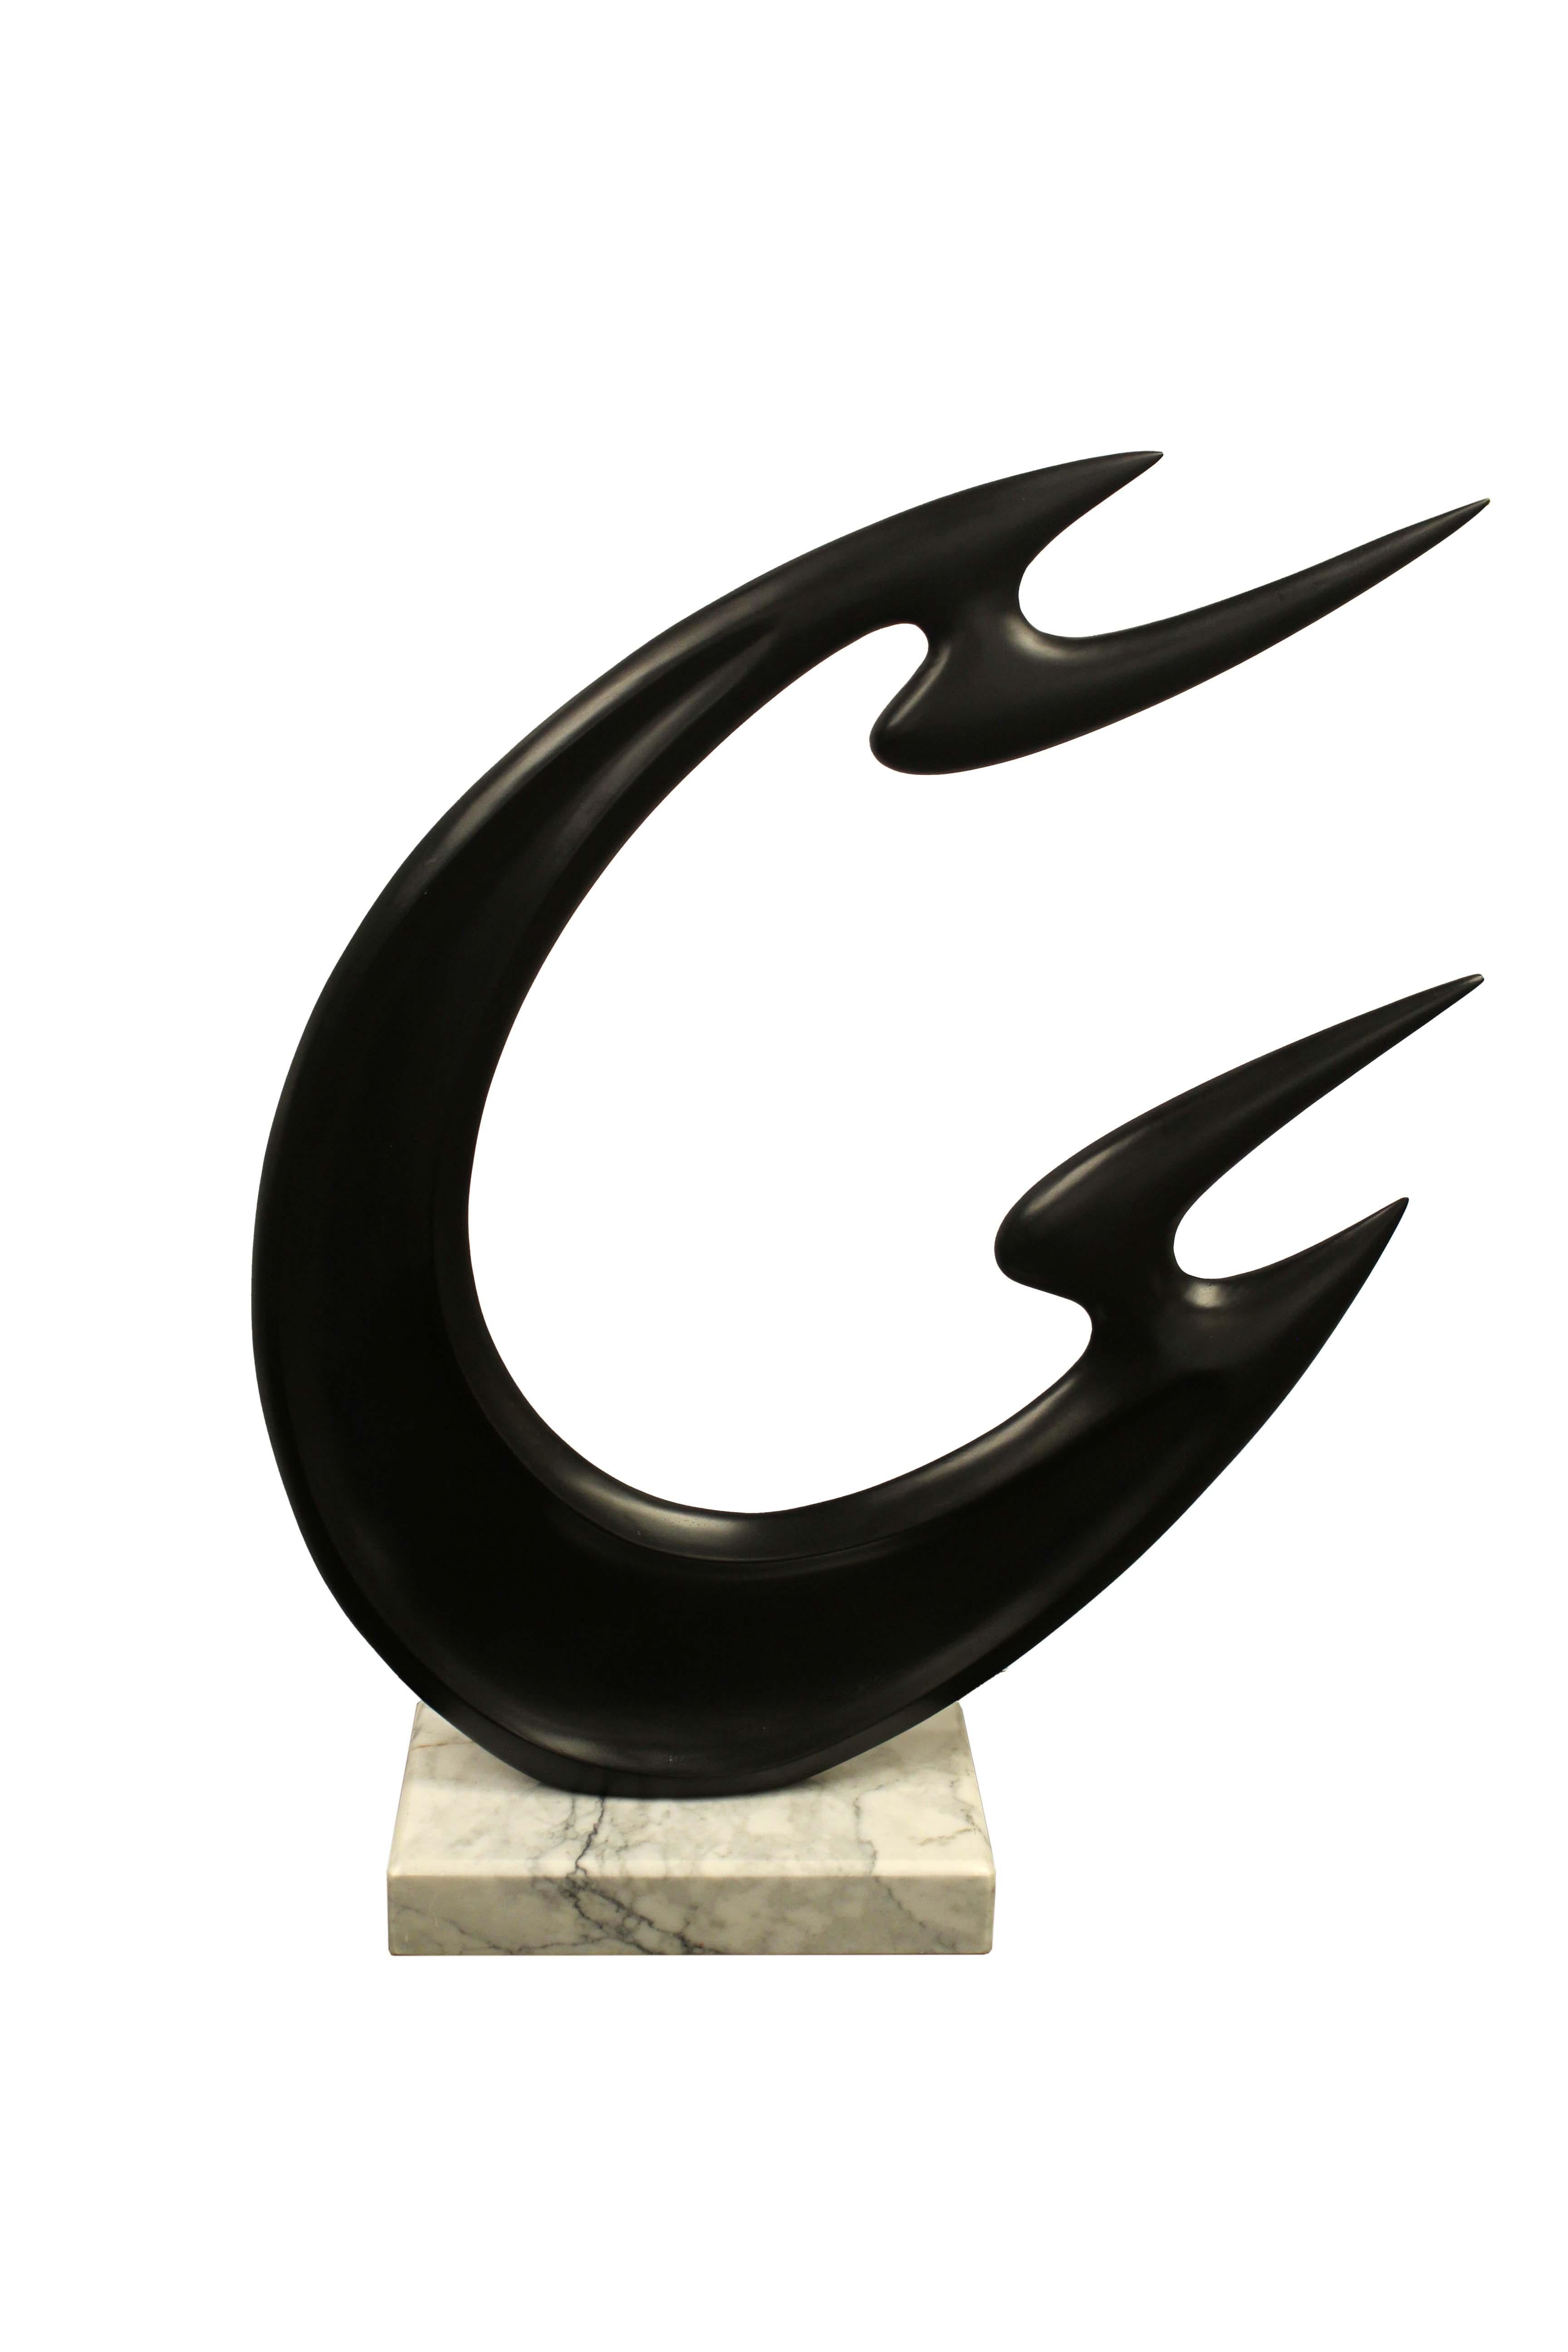 An elegant contemporary bronze sculpture on marble base. The flowing abstract forms adds an element of drama. A marvelous addition to any contemporary designed space. From a private collection. Dimensions: 29 H x 23 W x 7.5 W. In very good